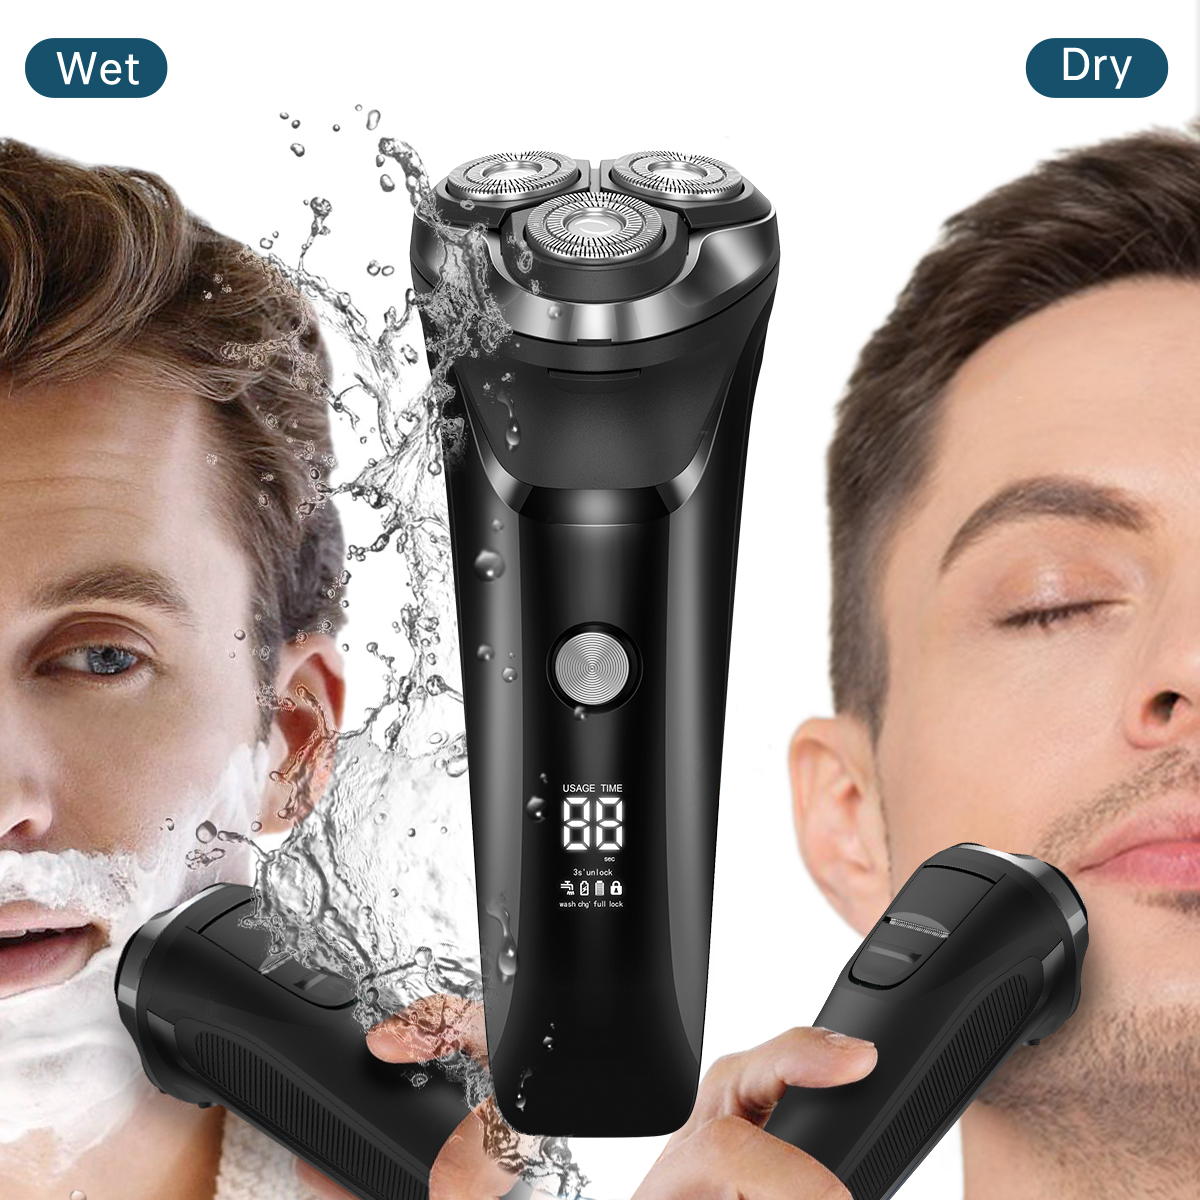 Men's Electric Razor, 2 in 1 4D Electric Rotary Shaver Cordless Rechargeable Face Beard Trimmer IPX7 Waterproof Dry/Wet, W/ LED Display & Holder for Husband Dad Travel - image 4 of 8